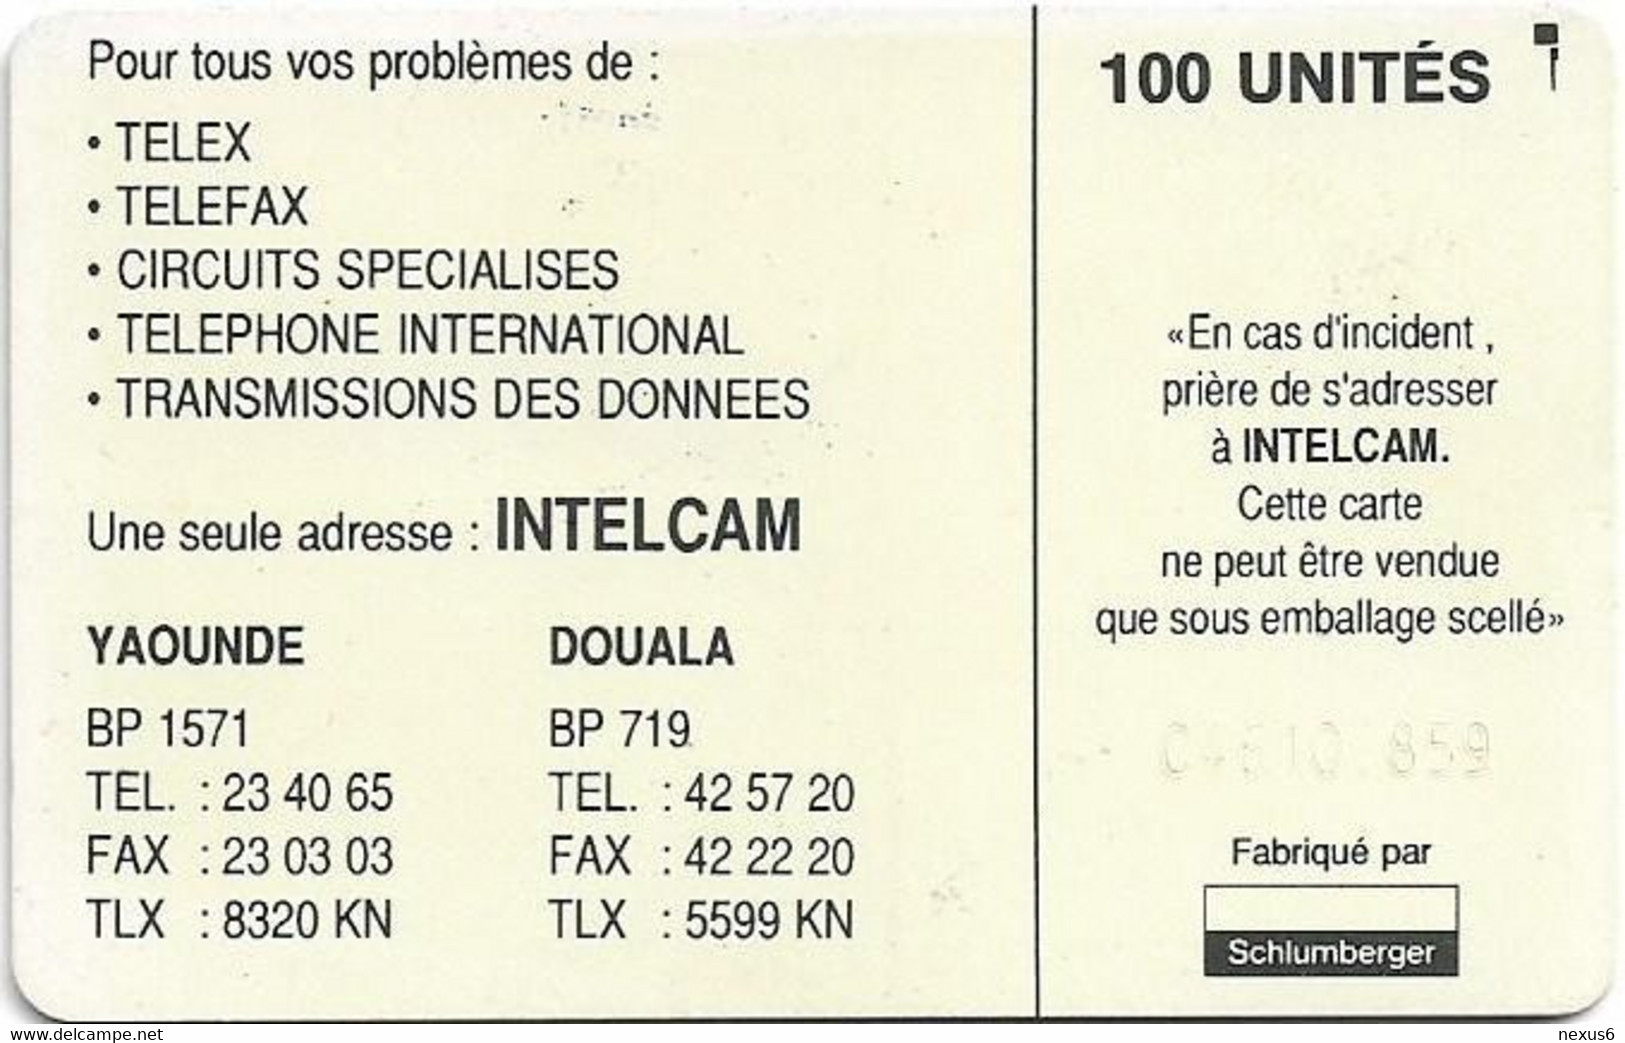 Cameroon - Intelcam - Chip - Logo Card - SC5 ISO, Glossy, Cn.C46100859, 100Units, Used - Cameroon